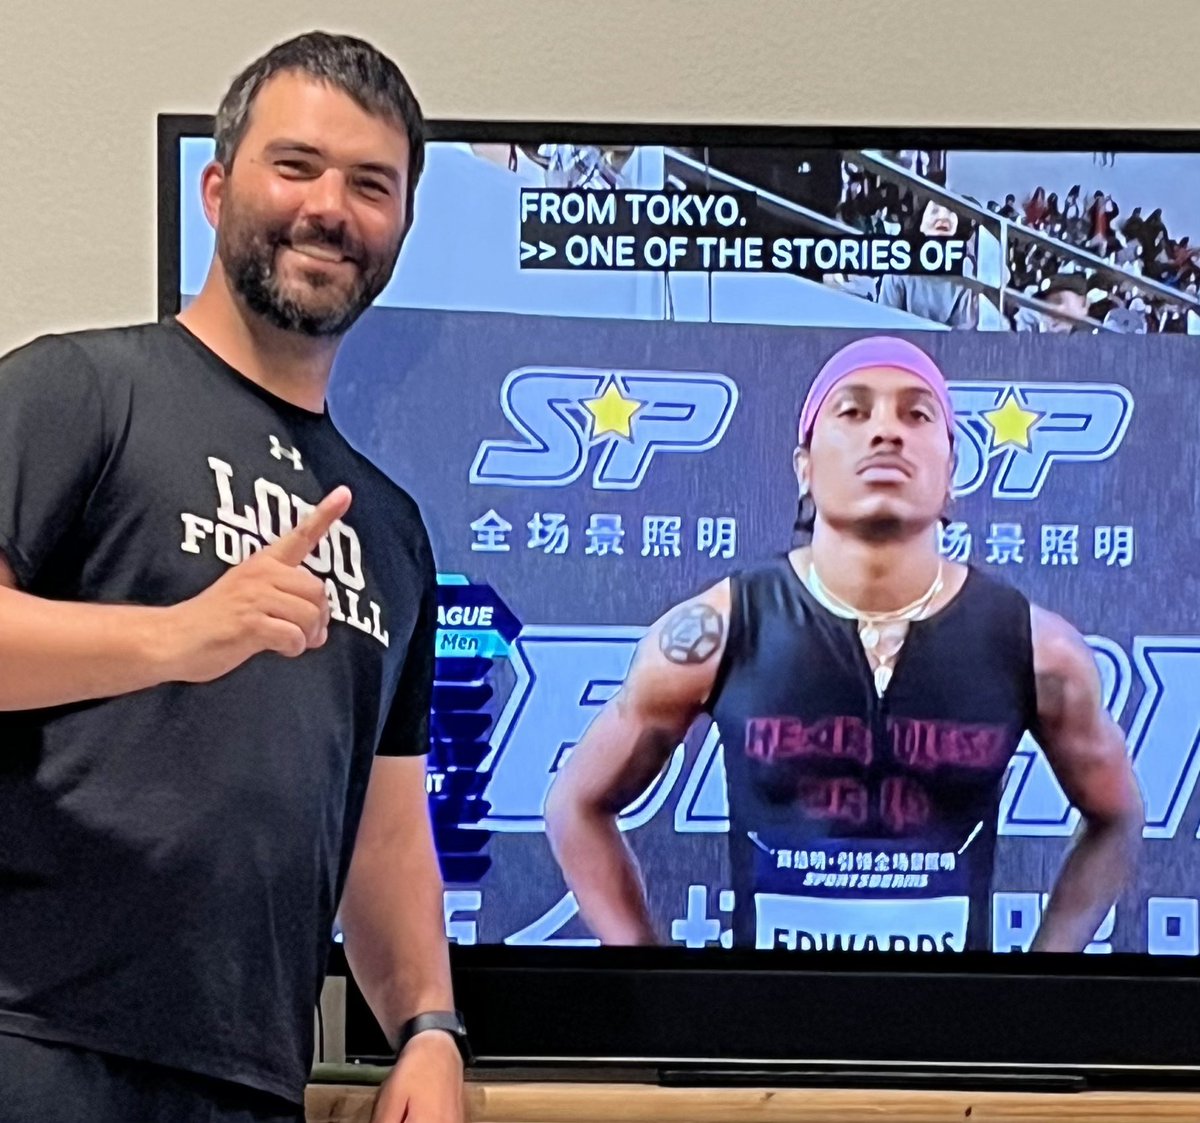 So cool getting to watch one of my former @langhamcreekhs @LCLobosTrack athlete Eric Edwards (@YouNgeSaVage__) on TV tonight in the Diamond League in China! Proud of you E!